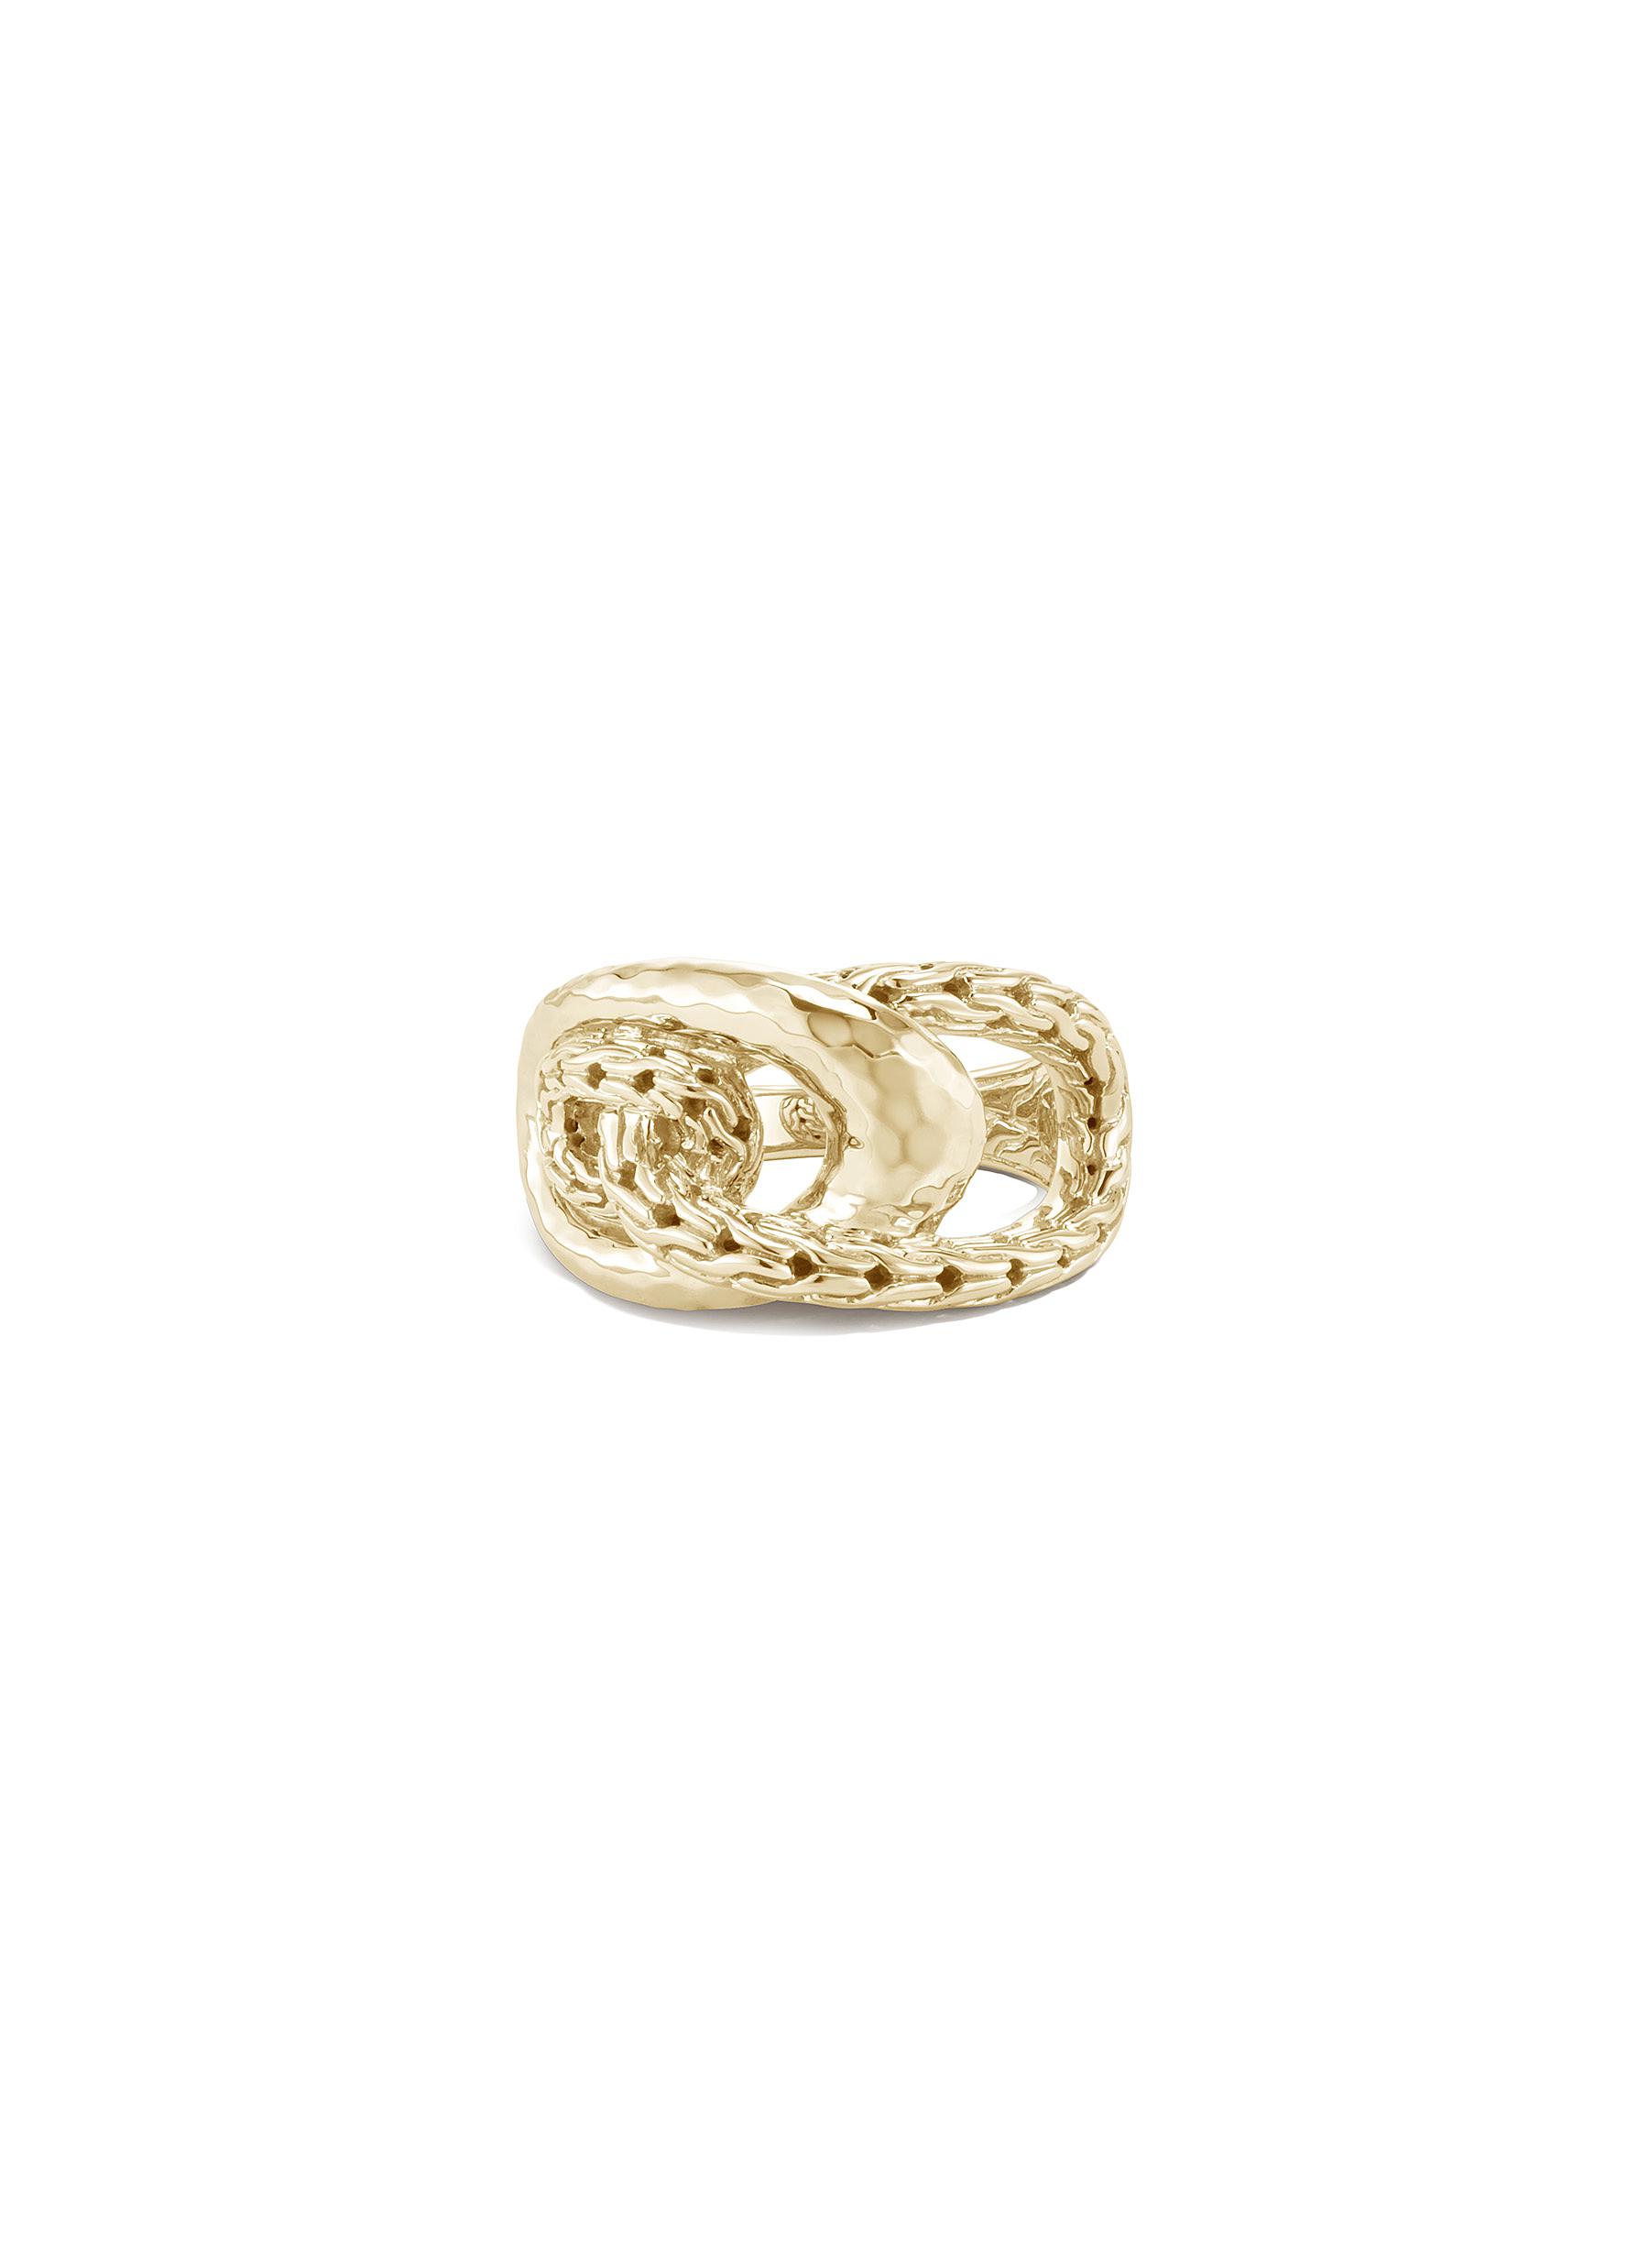 JOHN HARDY Classic Chain' Palu Hammered 18K Gold Ring Sculptural Link Ring